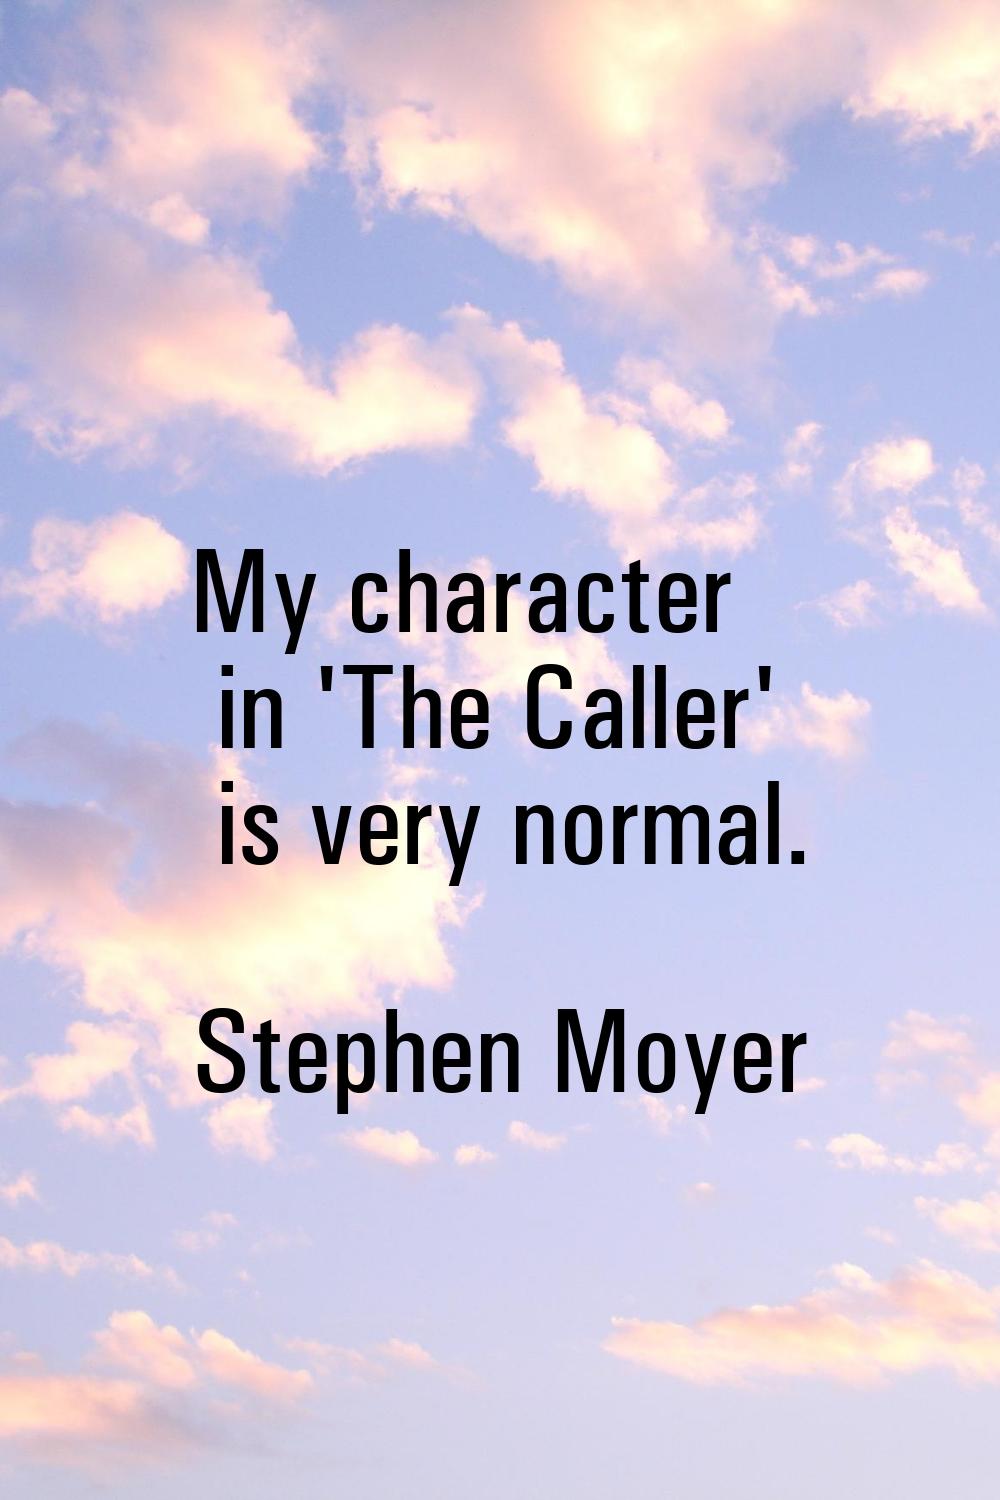 My character in 'The Caller' is very normal.